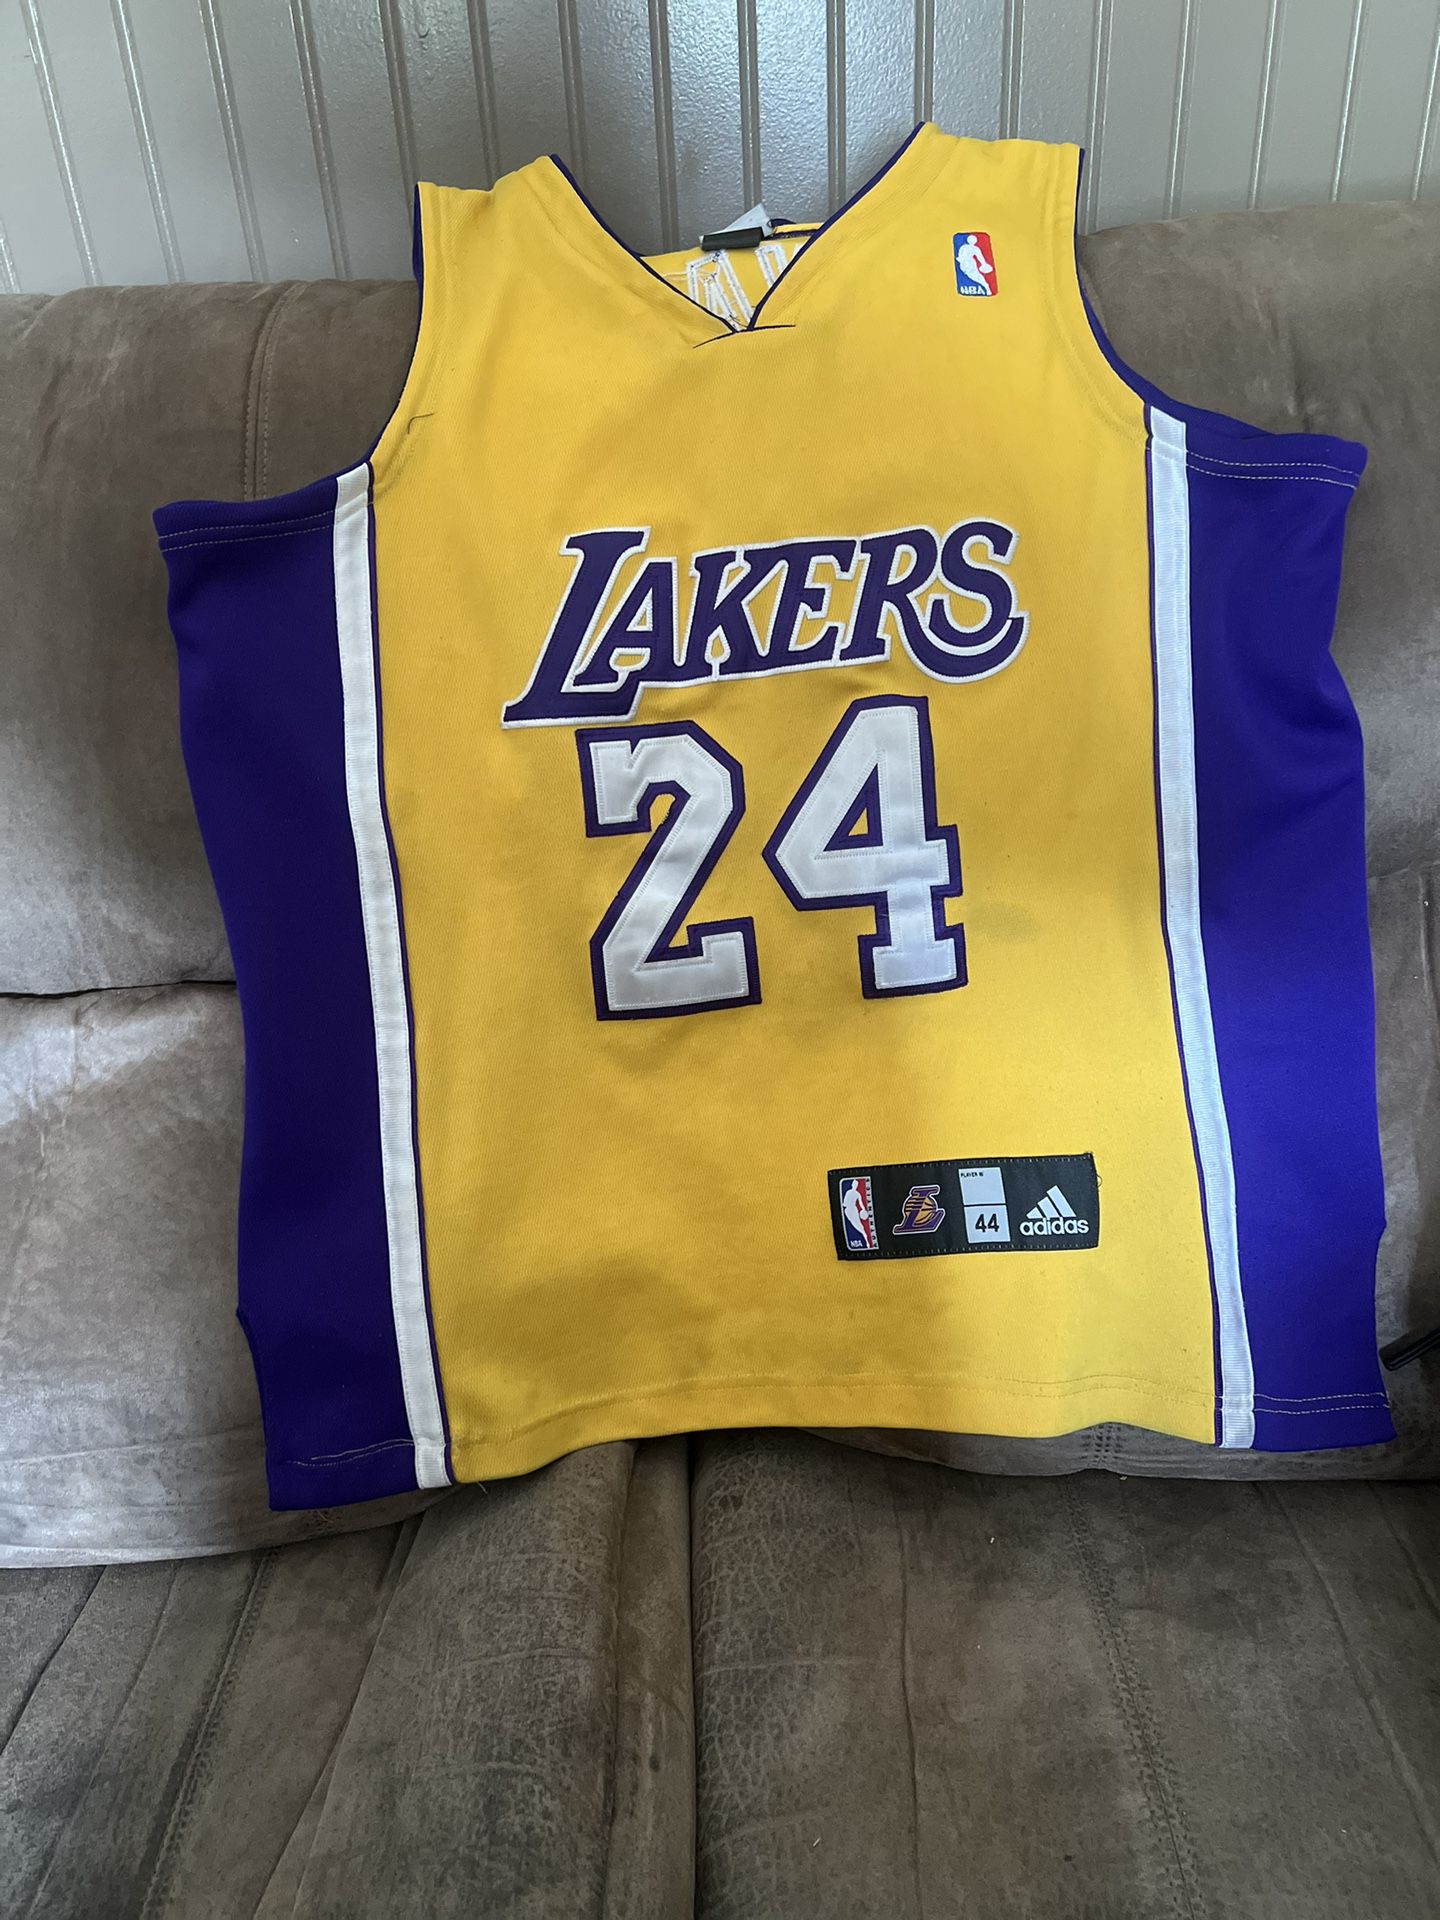 Lakers Jersey  No Longer For Sale As Of 11/25/23